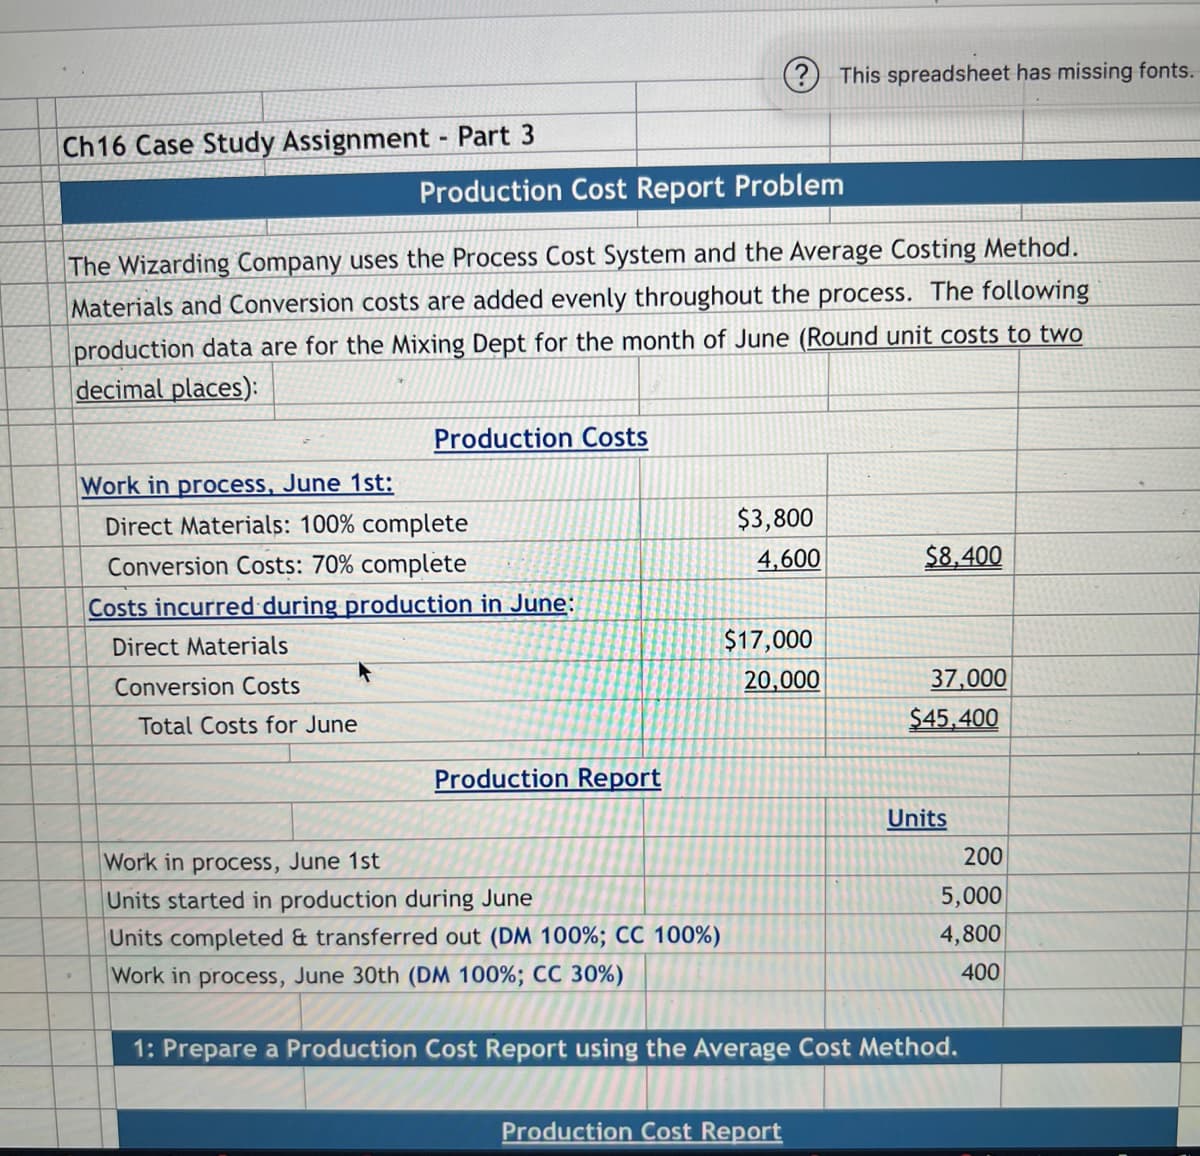 (?) This spreadsheet has missing fonts.
Ch16 Case Study Assignment - Part 3
Production Cost Report Problem
The Wizarding Company uses the Process Cost System and the Average Costing Method.
Materials and Conversion costs are added evenly throughout the process. The following
production data are for the Mixing Dept for the month of June (Round unit costs to two
decimal places):
Production Costs
Work in process, June 1st:
Direct Materials: 100% complete
$3,800
4,600
$8,400
Conversion Costs: 70% complete
Costs incurred during production in June:
Direct Materials
$17,000
Conversion Costs
20,000
37,000
Total Costs for June
$45,400
Production Report
Units
Work in process, June 1st
200
5,000
Units started in production during June
Units completed & transferred out (DM 100%; CC 100%)
4,800
Work in process, June 30th (DM 100%; CC 30%)
400
1: Prepare a Production Cost Report using the Average Cost Method.
Production Cost Report
